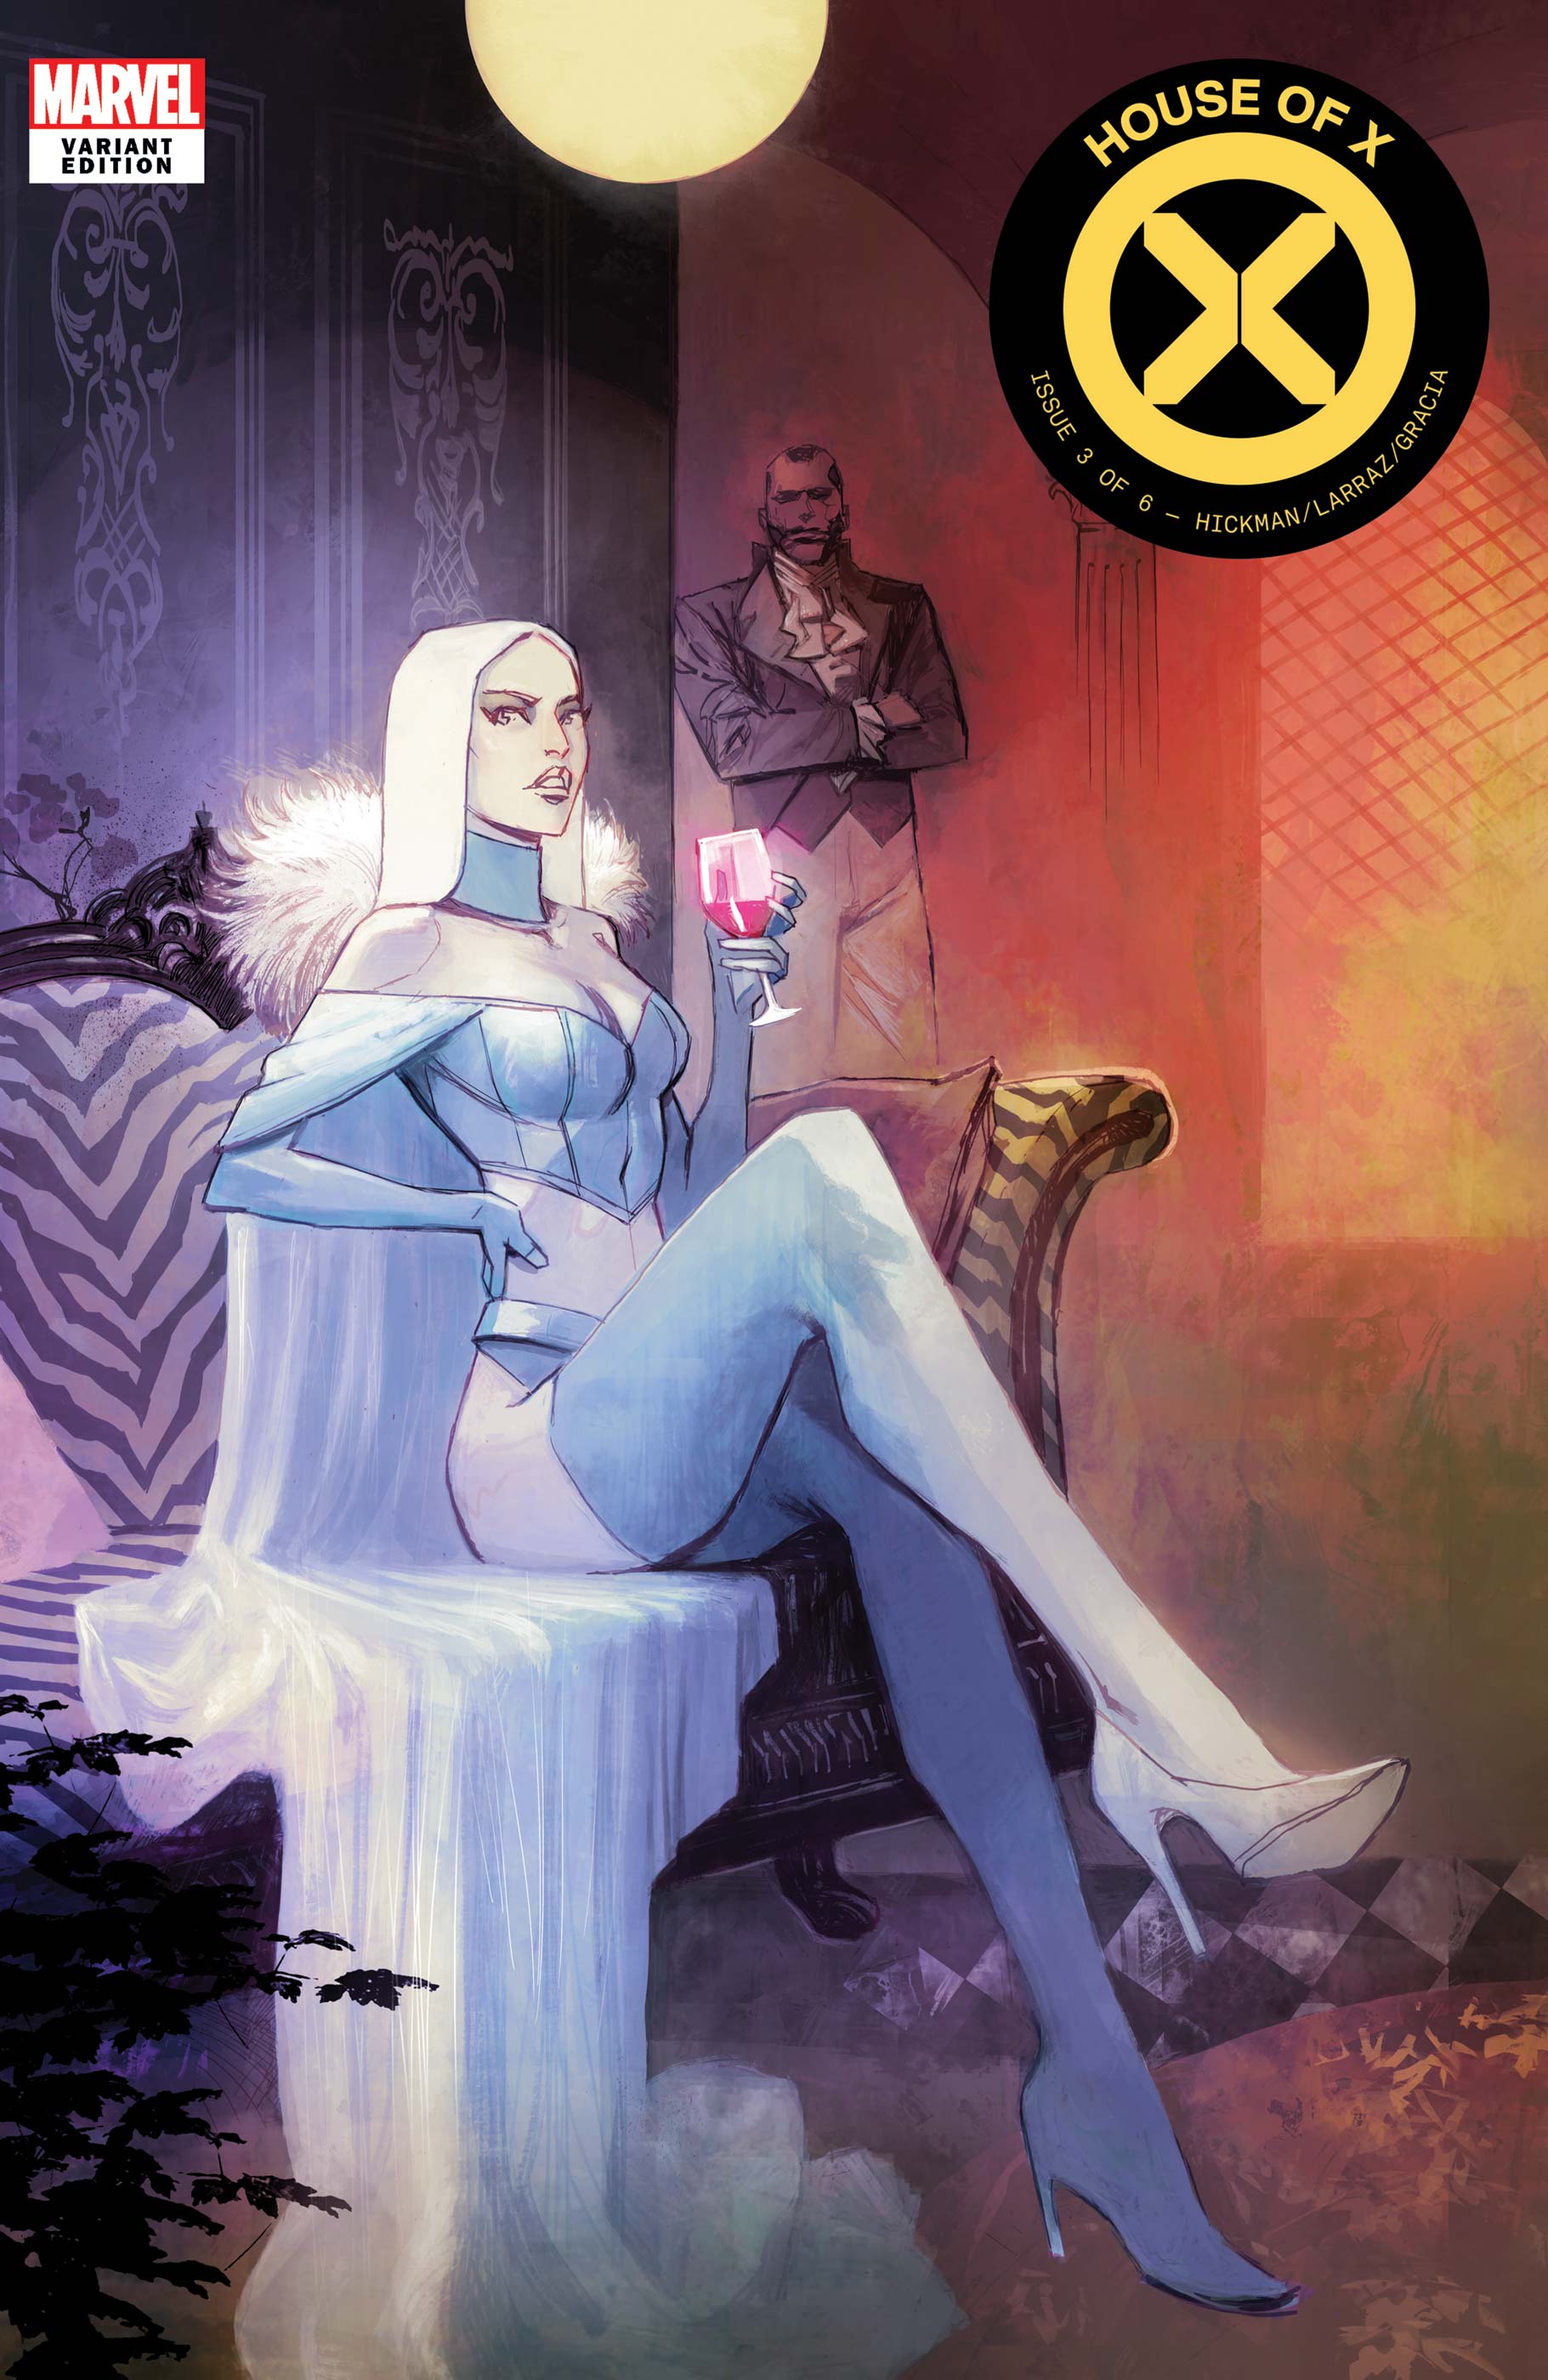 House of X (2019) #3 (Variant)